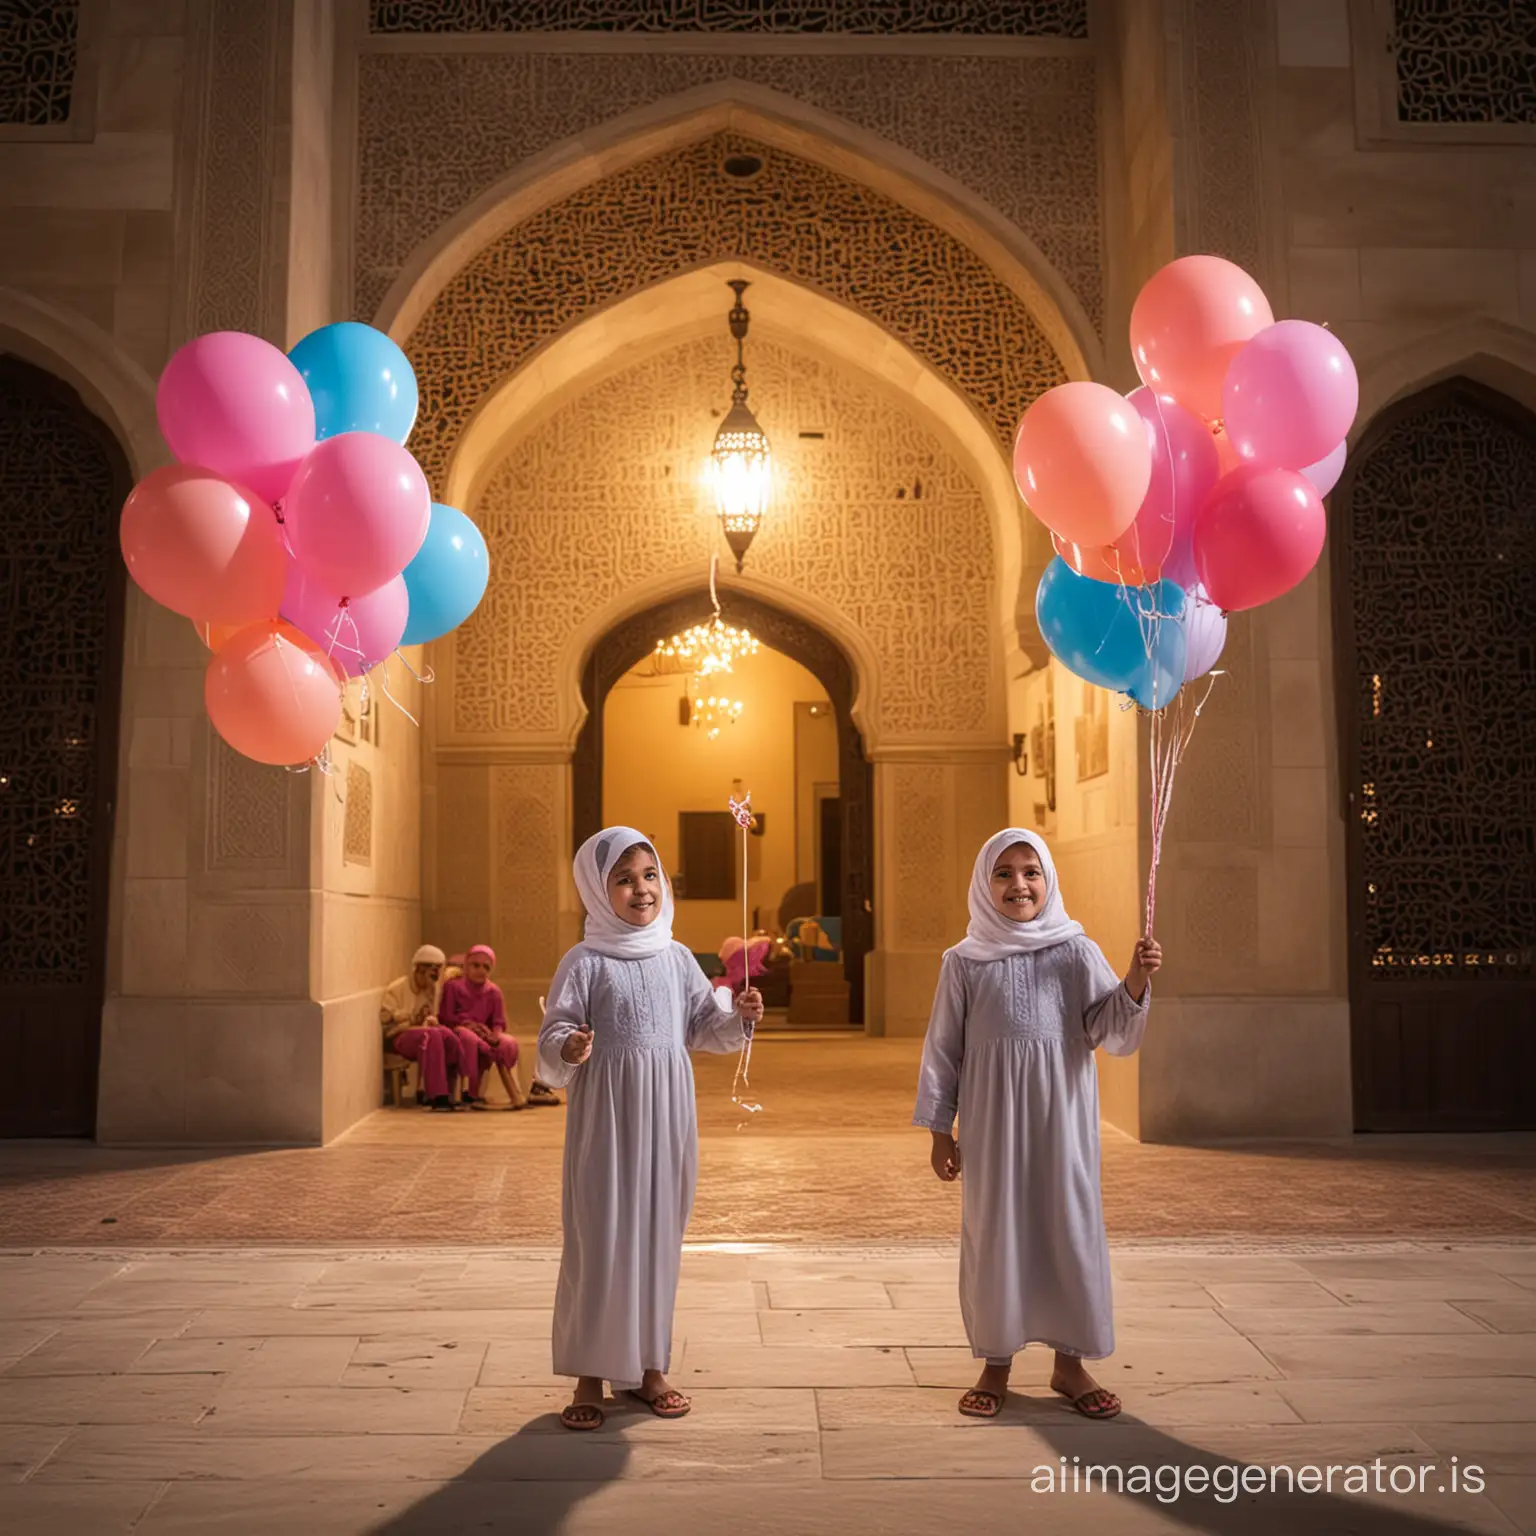 Joyful-Arab-Children-Celebrating-Eid-ul-Fitr-with-Balloons-and-Candy-in-Mosque-Courtyard-at-Night